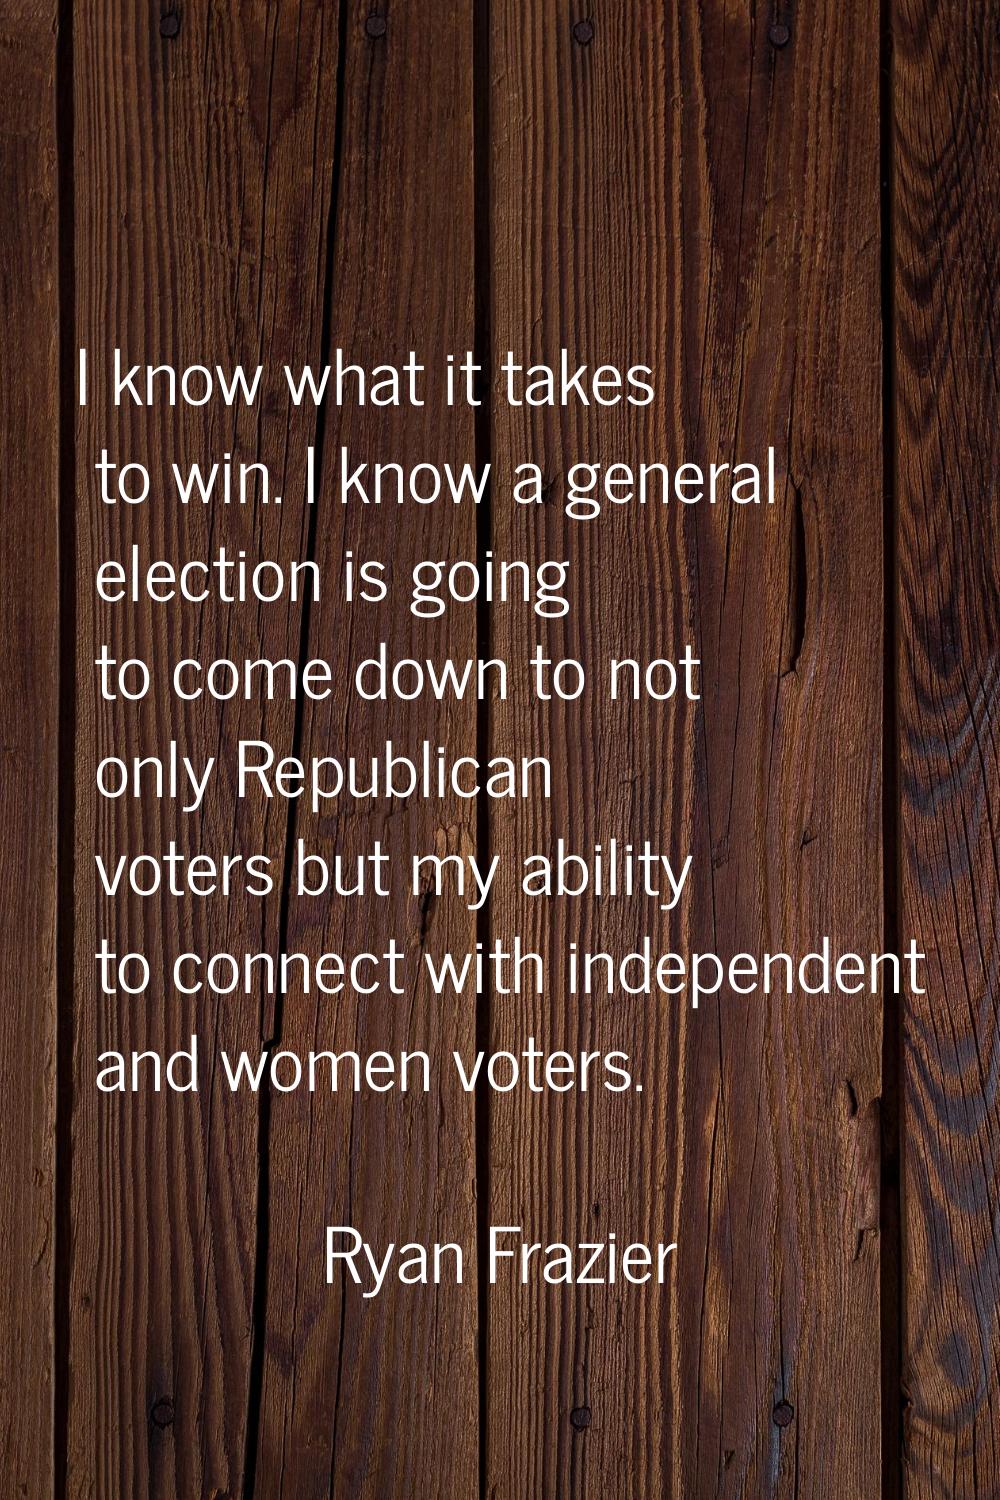 I know what it takes to win. I know a general election is going to come down to not only Republican